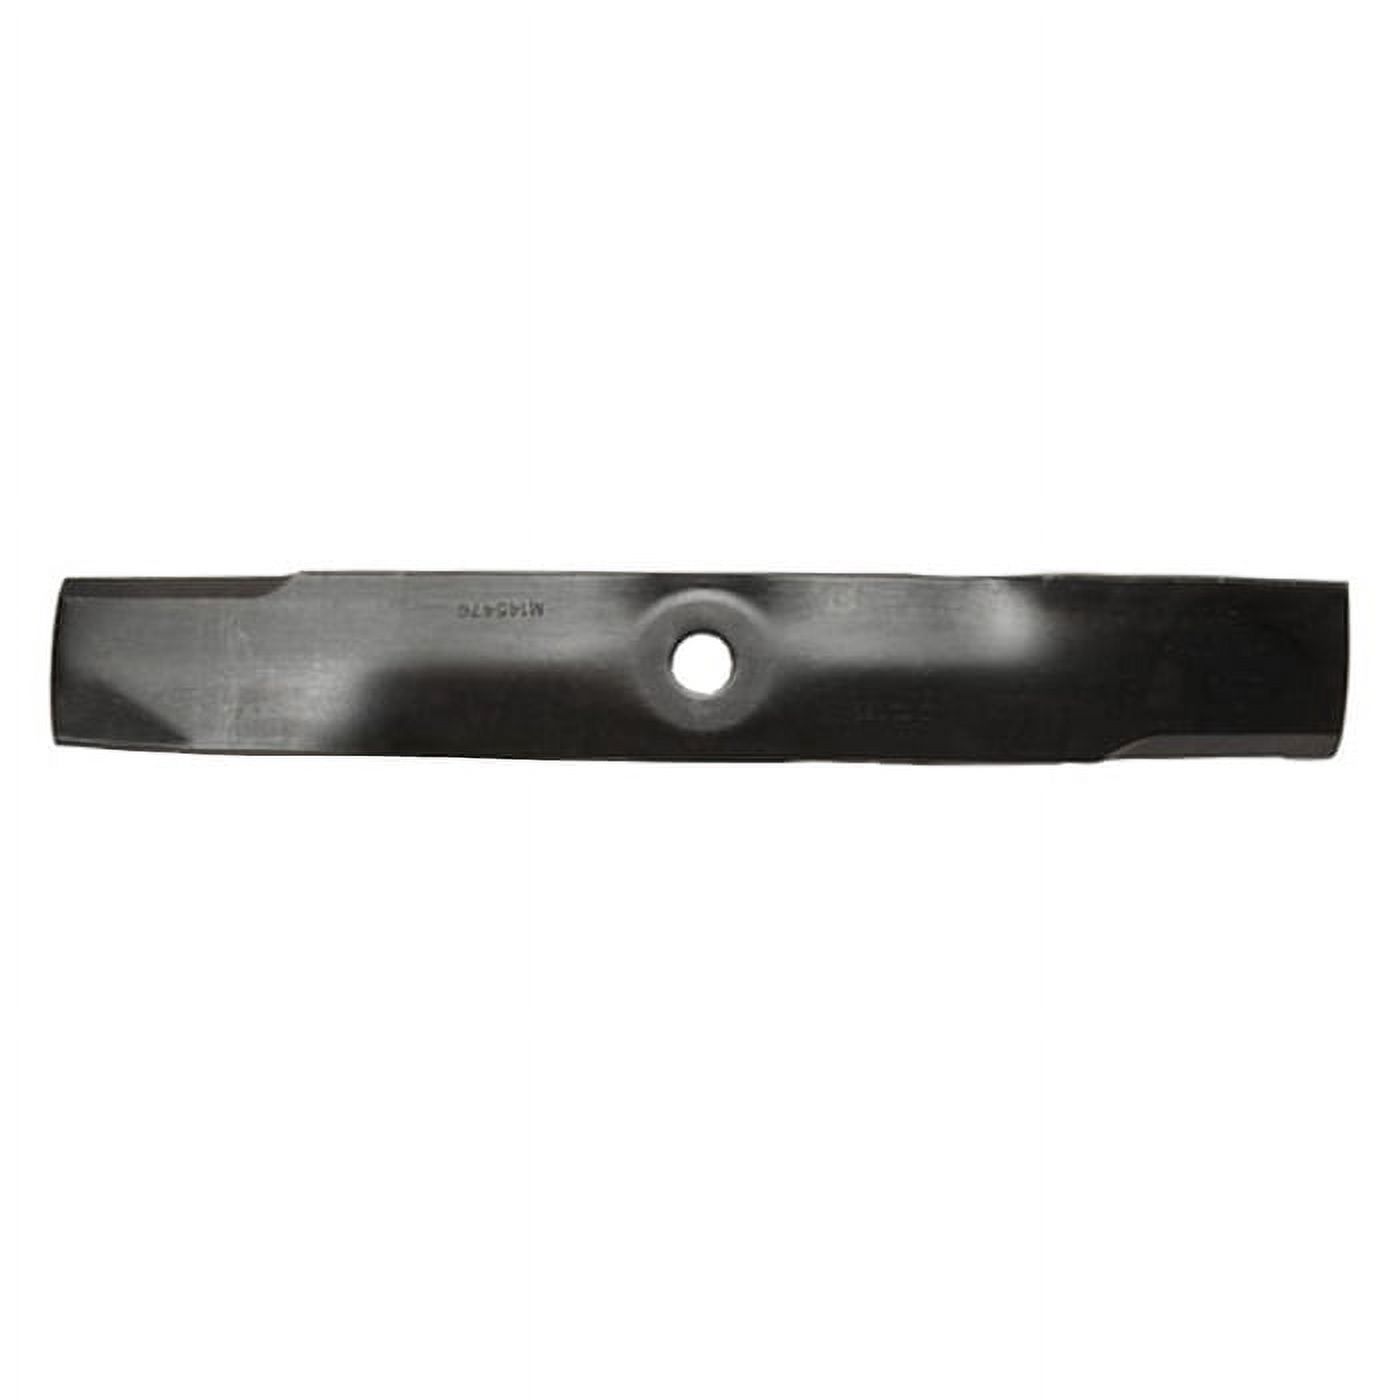 John Deere Lawn Mower Blade (Standard) For 300, GT, GX, LT, LX, SST, Select, Signature, and EZtrak Series with 48C Deck - image 1 of 1